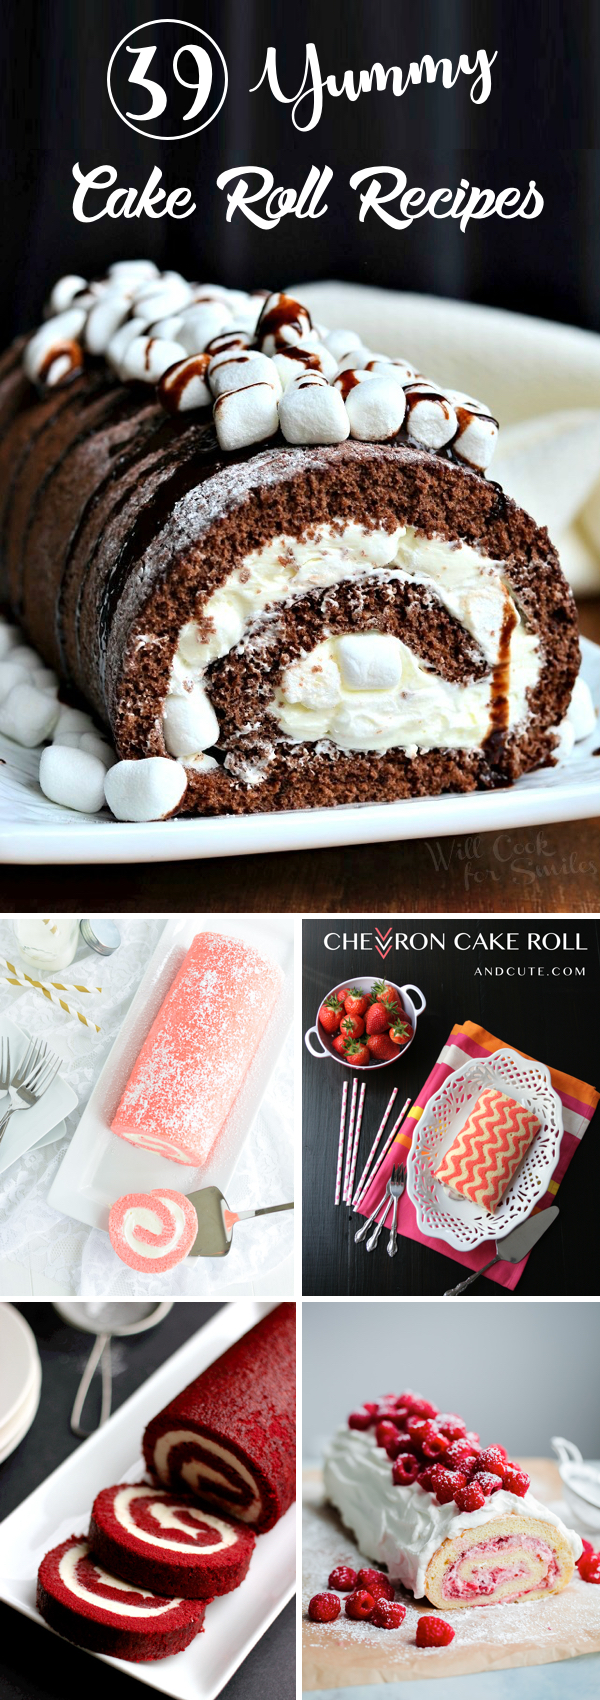 Yummy Cake Roll Recipes Combining Cream and Sponge in one Sweet Log!